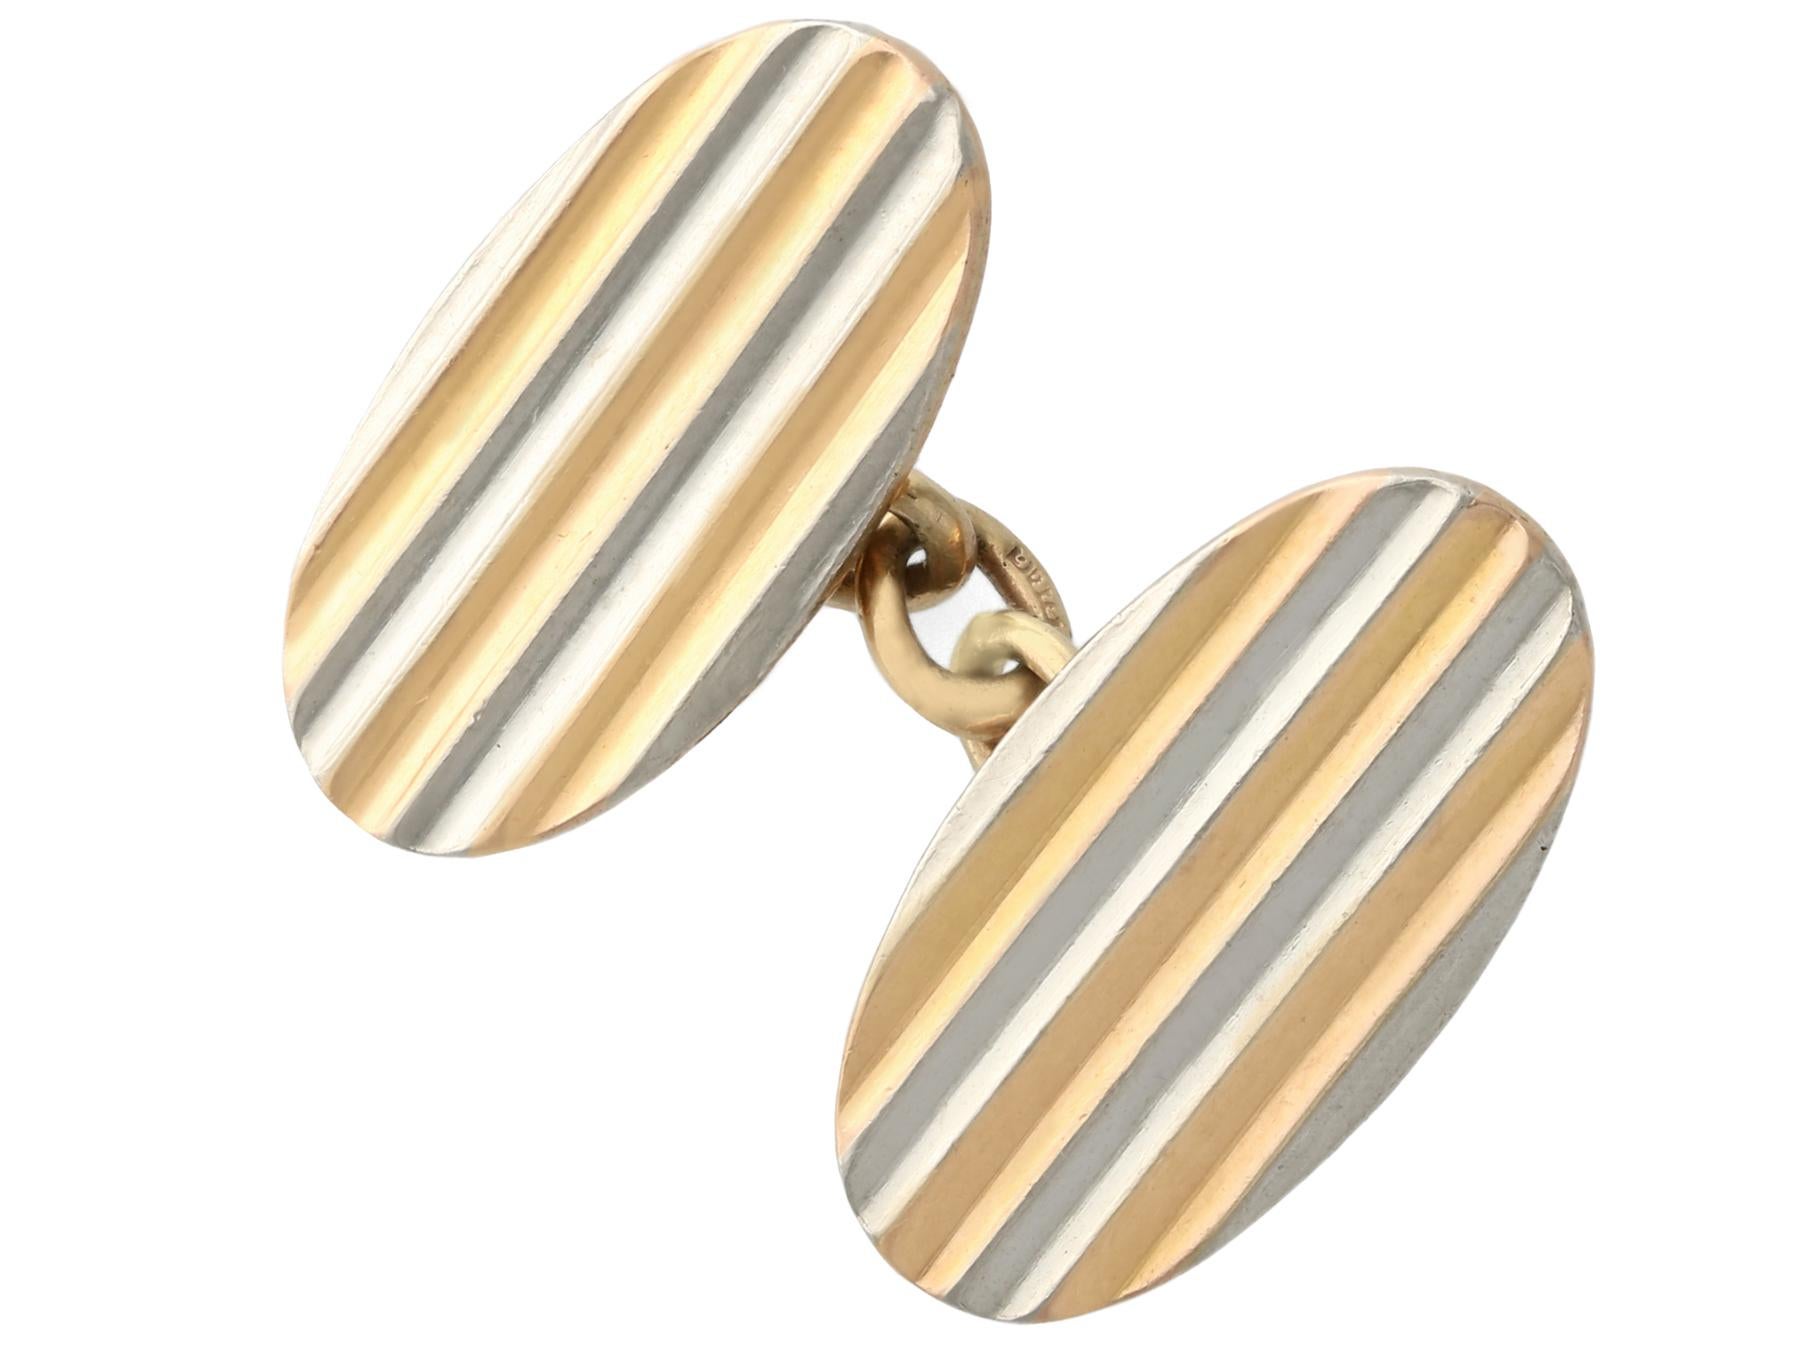 Antique Yellow Gold and Platinum Cufflinks, circa 1910 In Excellent Condition For Sale In Jesmond, Newcastle Upon Tyne